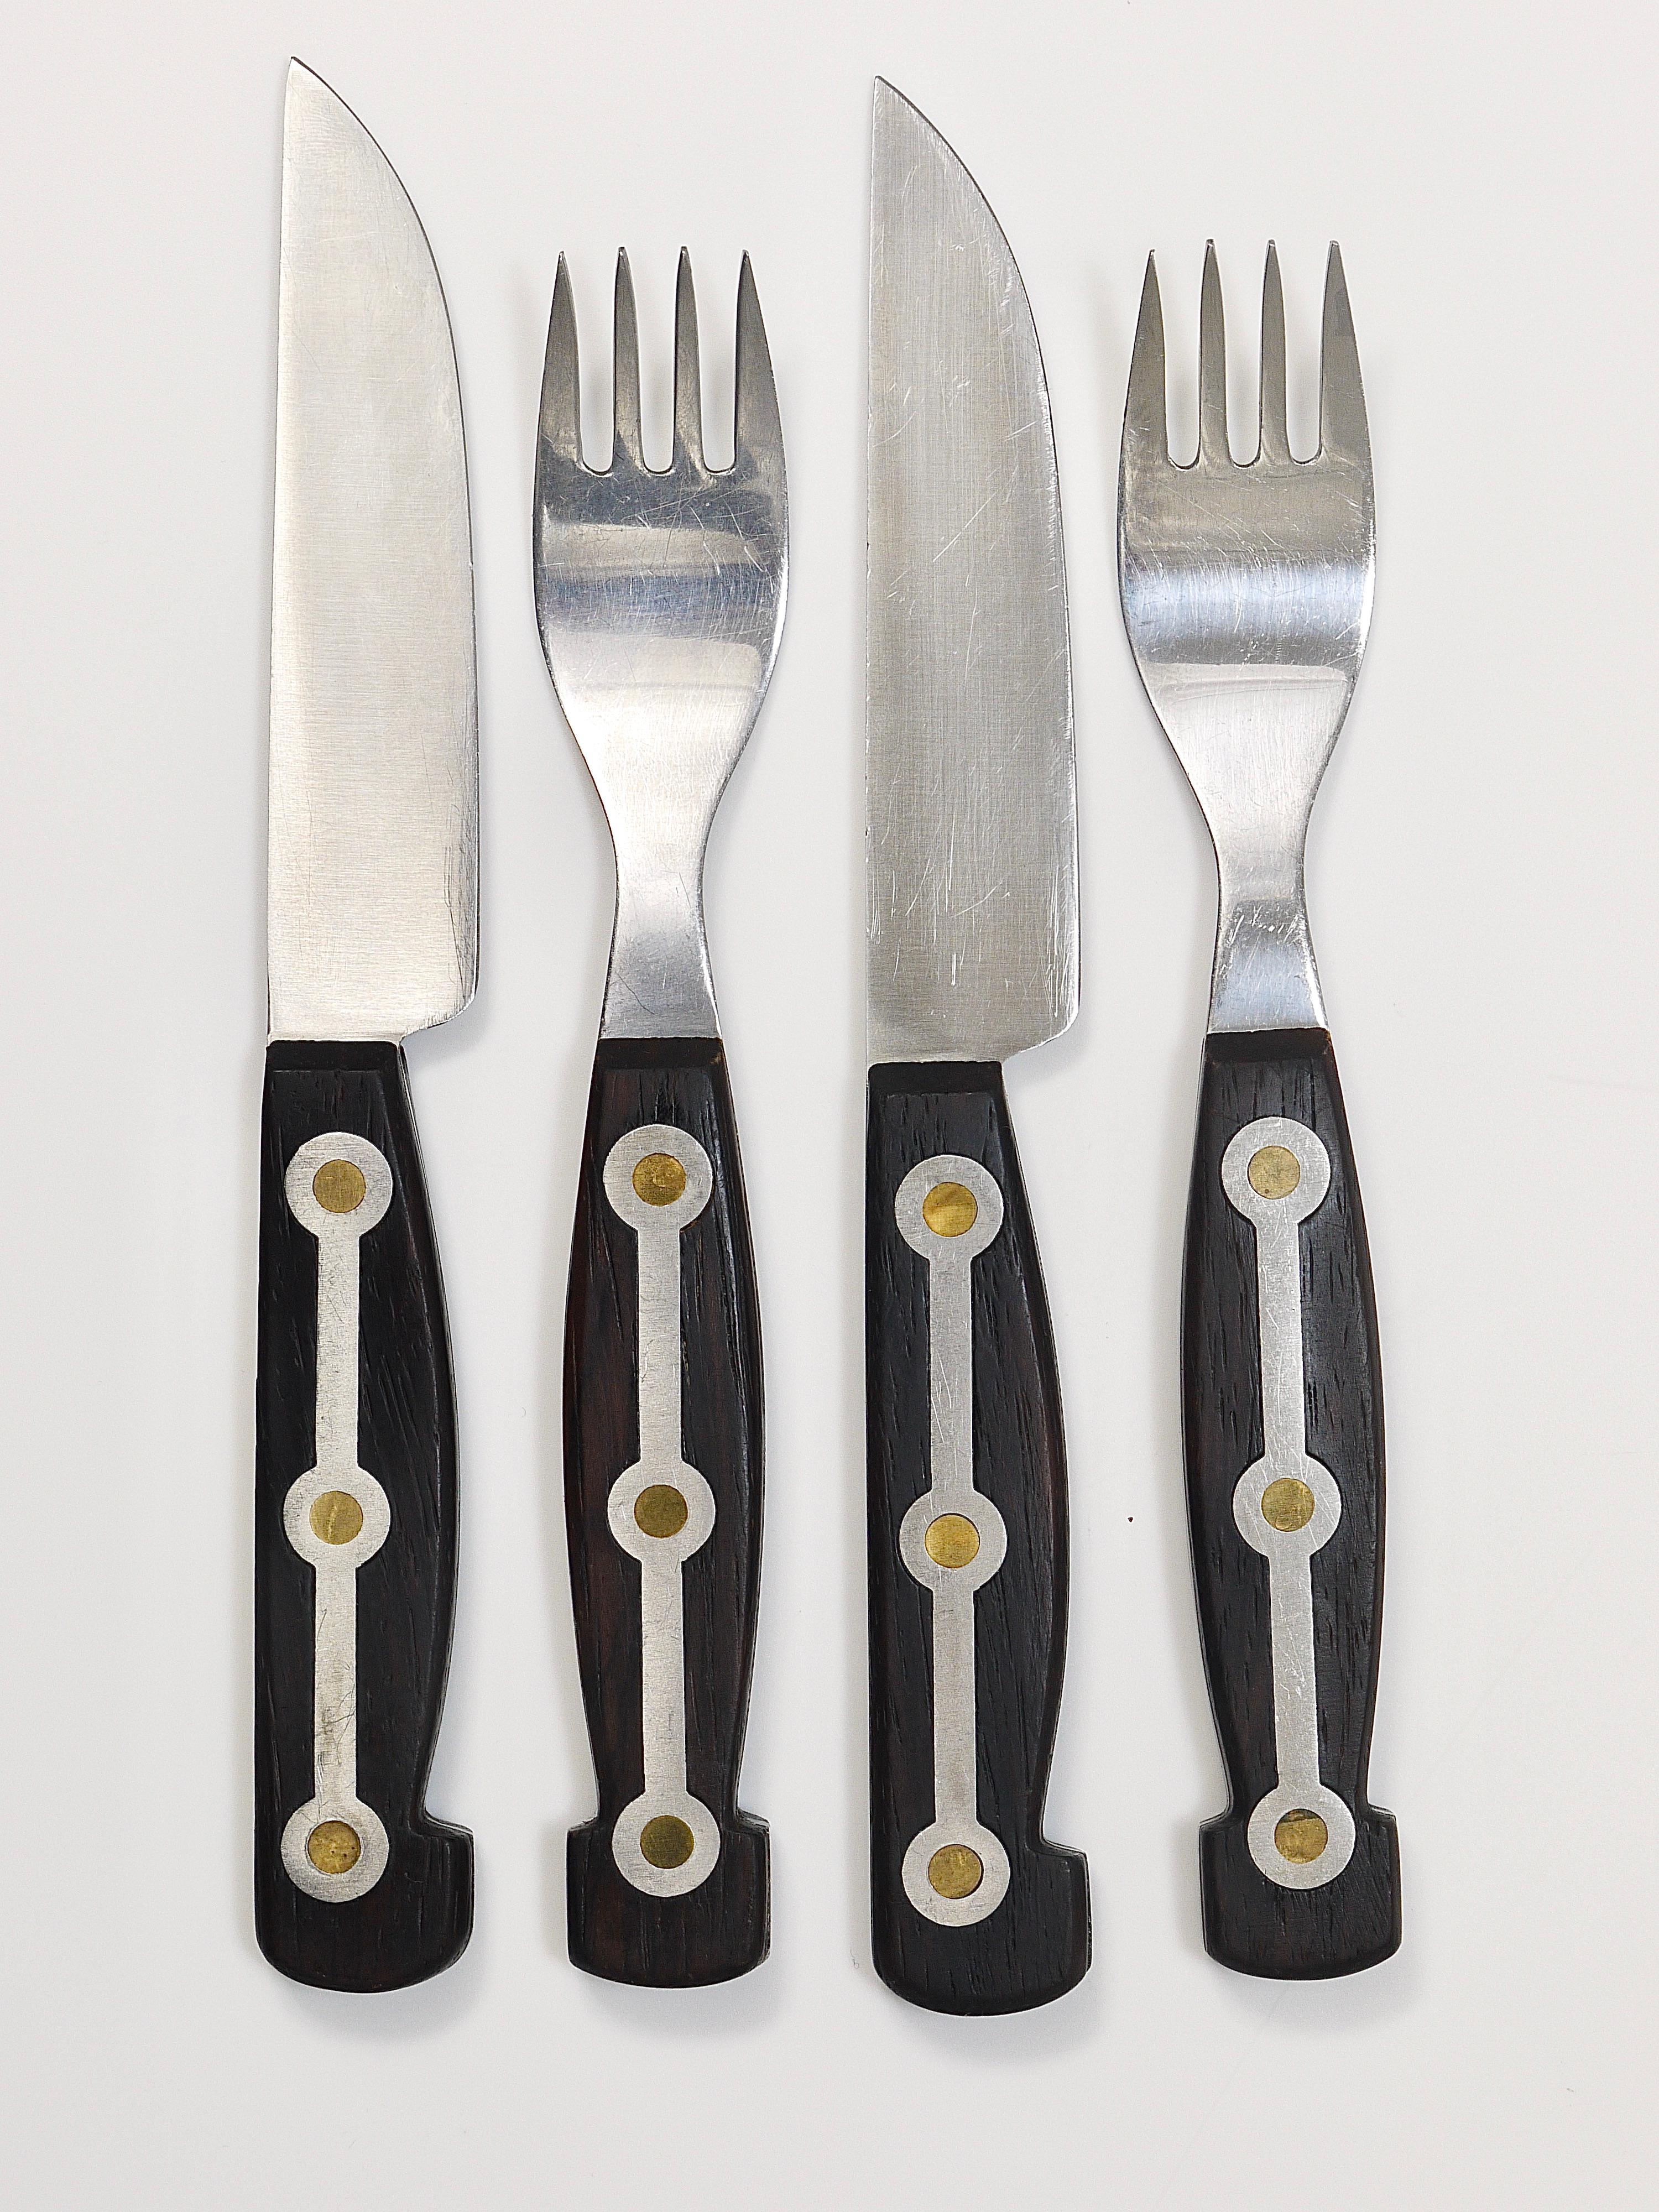 Two Amboss 1050 Snack Board Fork and Knife Sets, Austria, 1960s For Sale 4